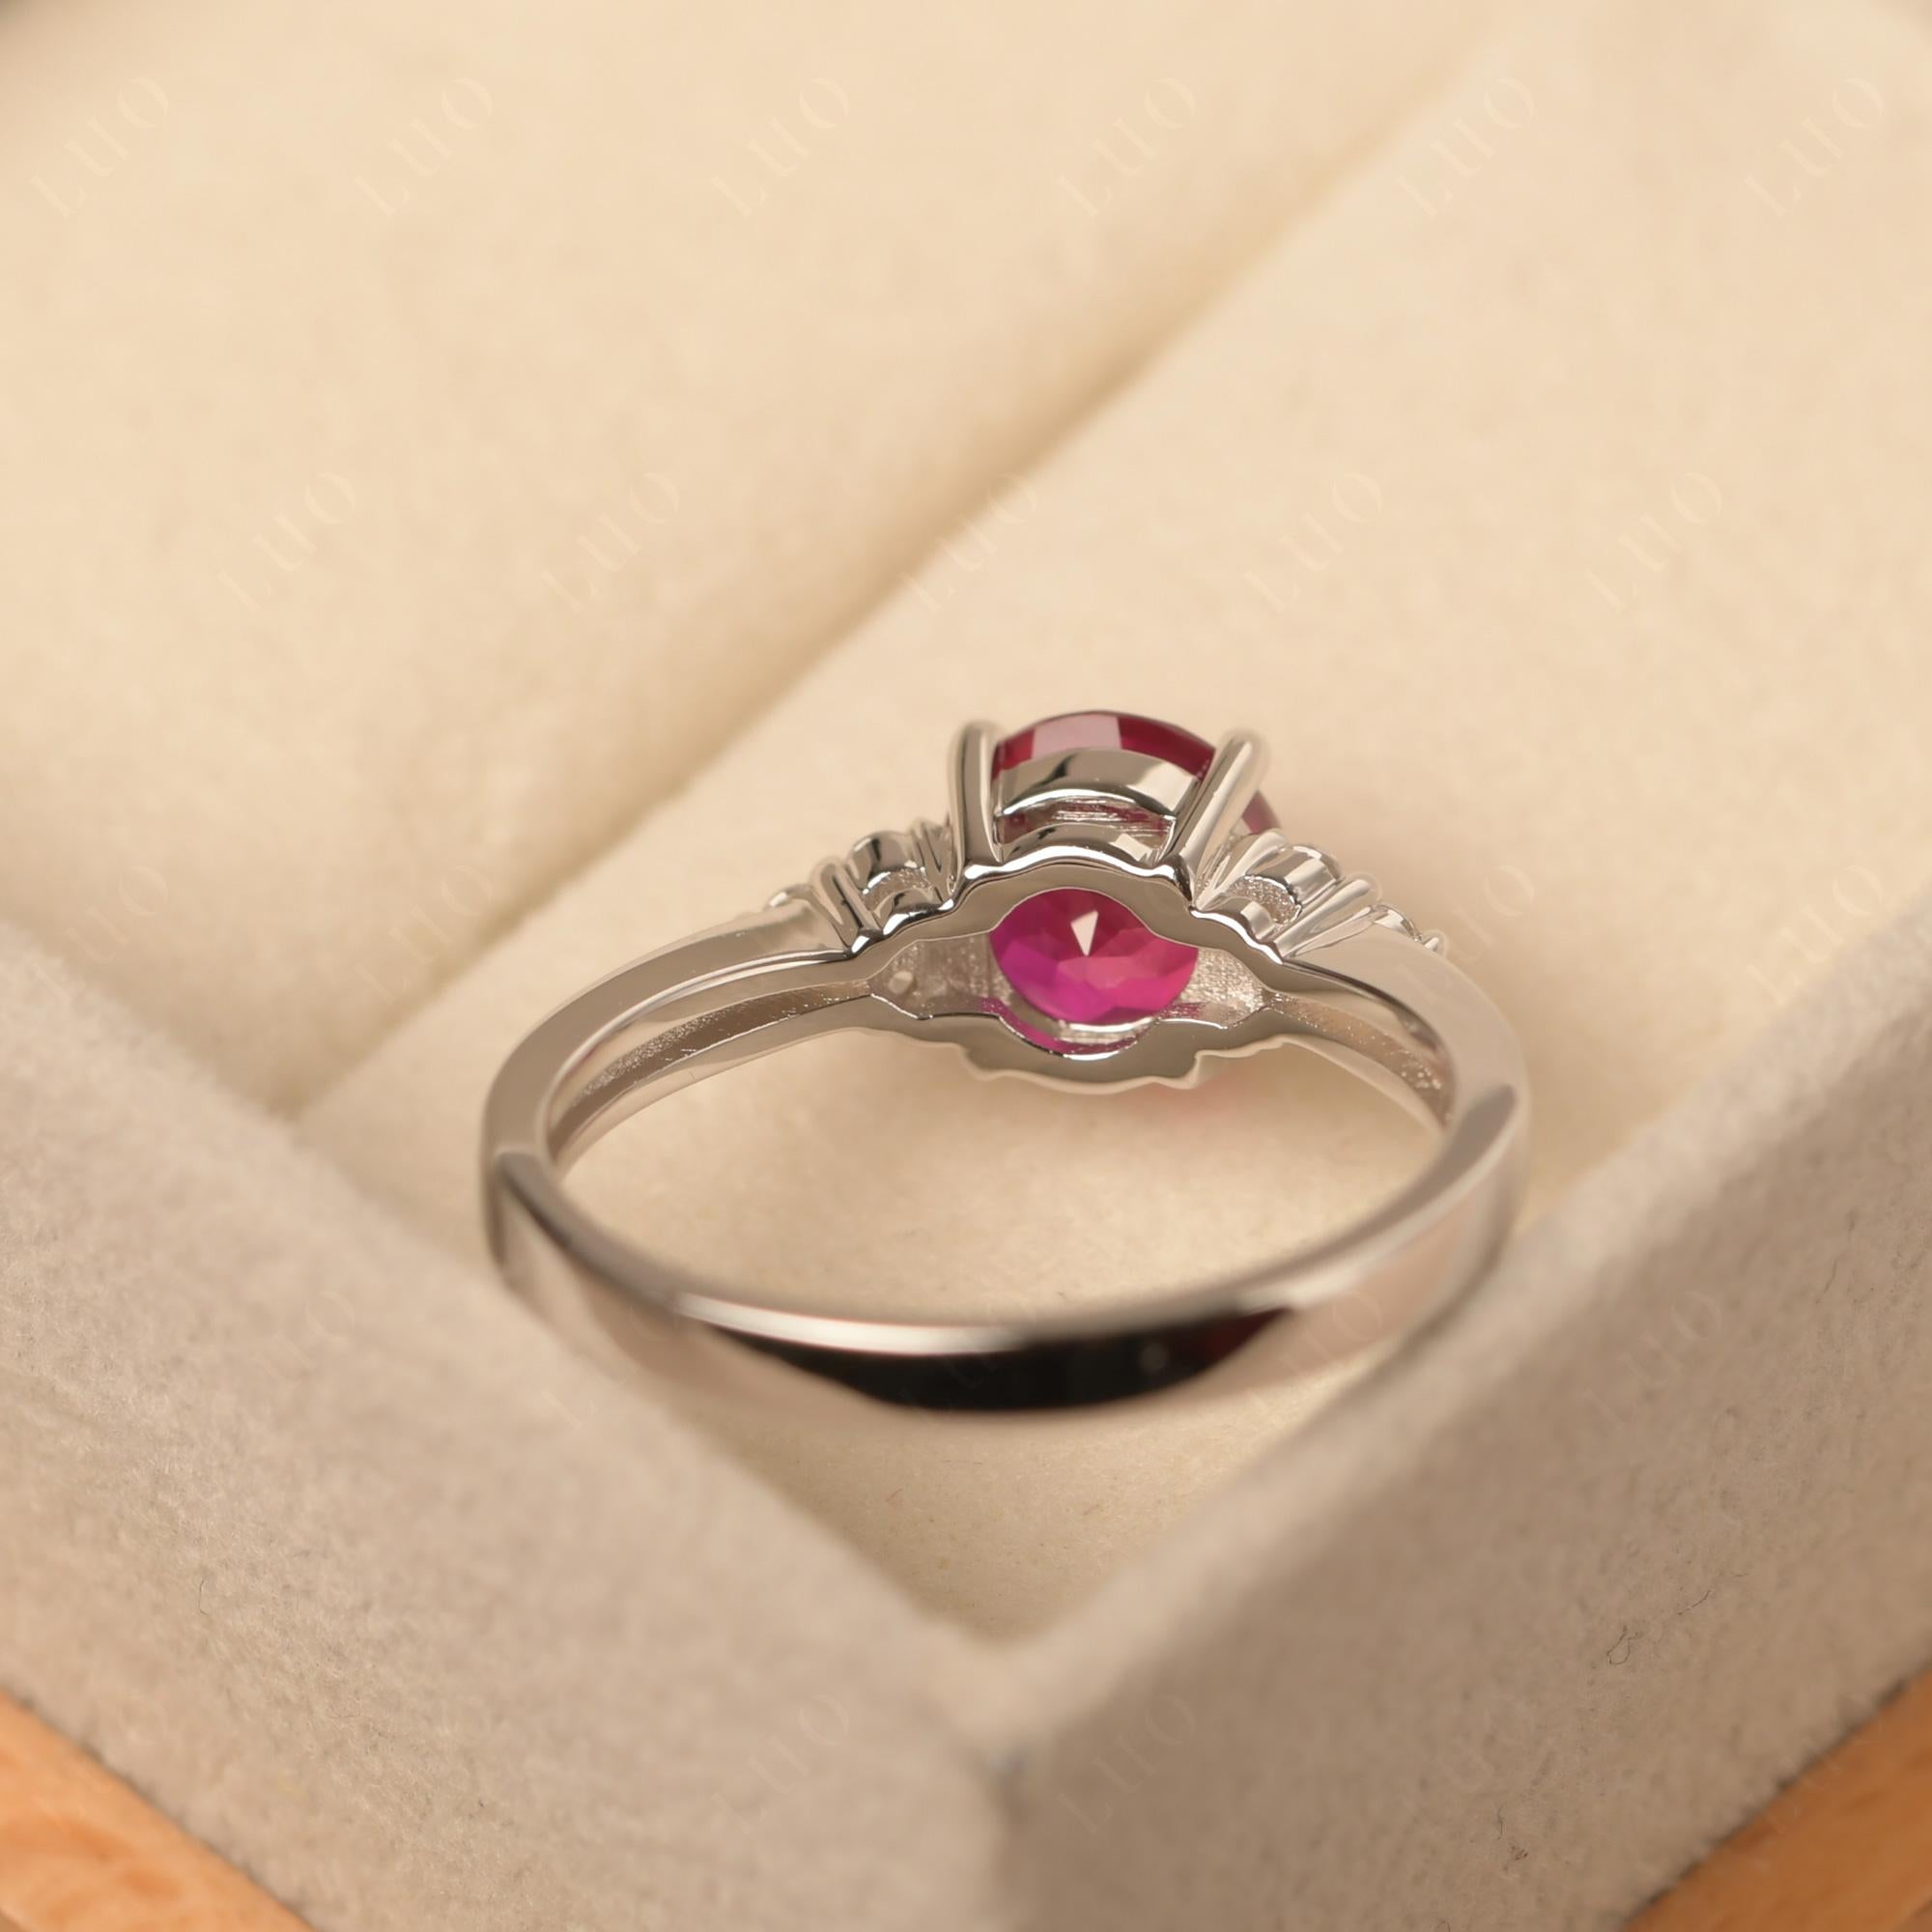 Round Cut Ruby Engagement Ring - LUO Jewelry